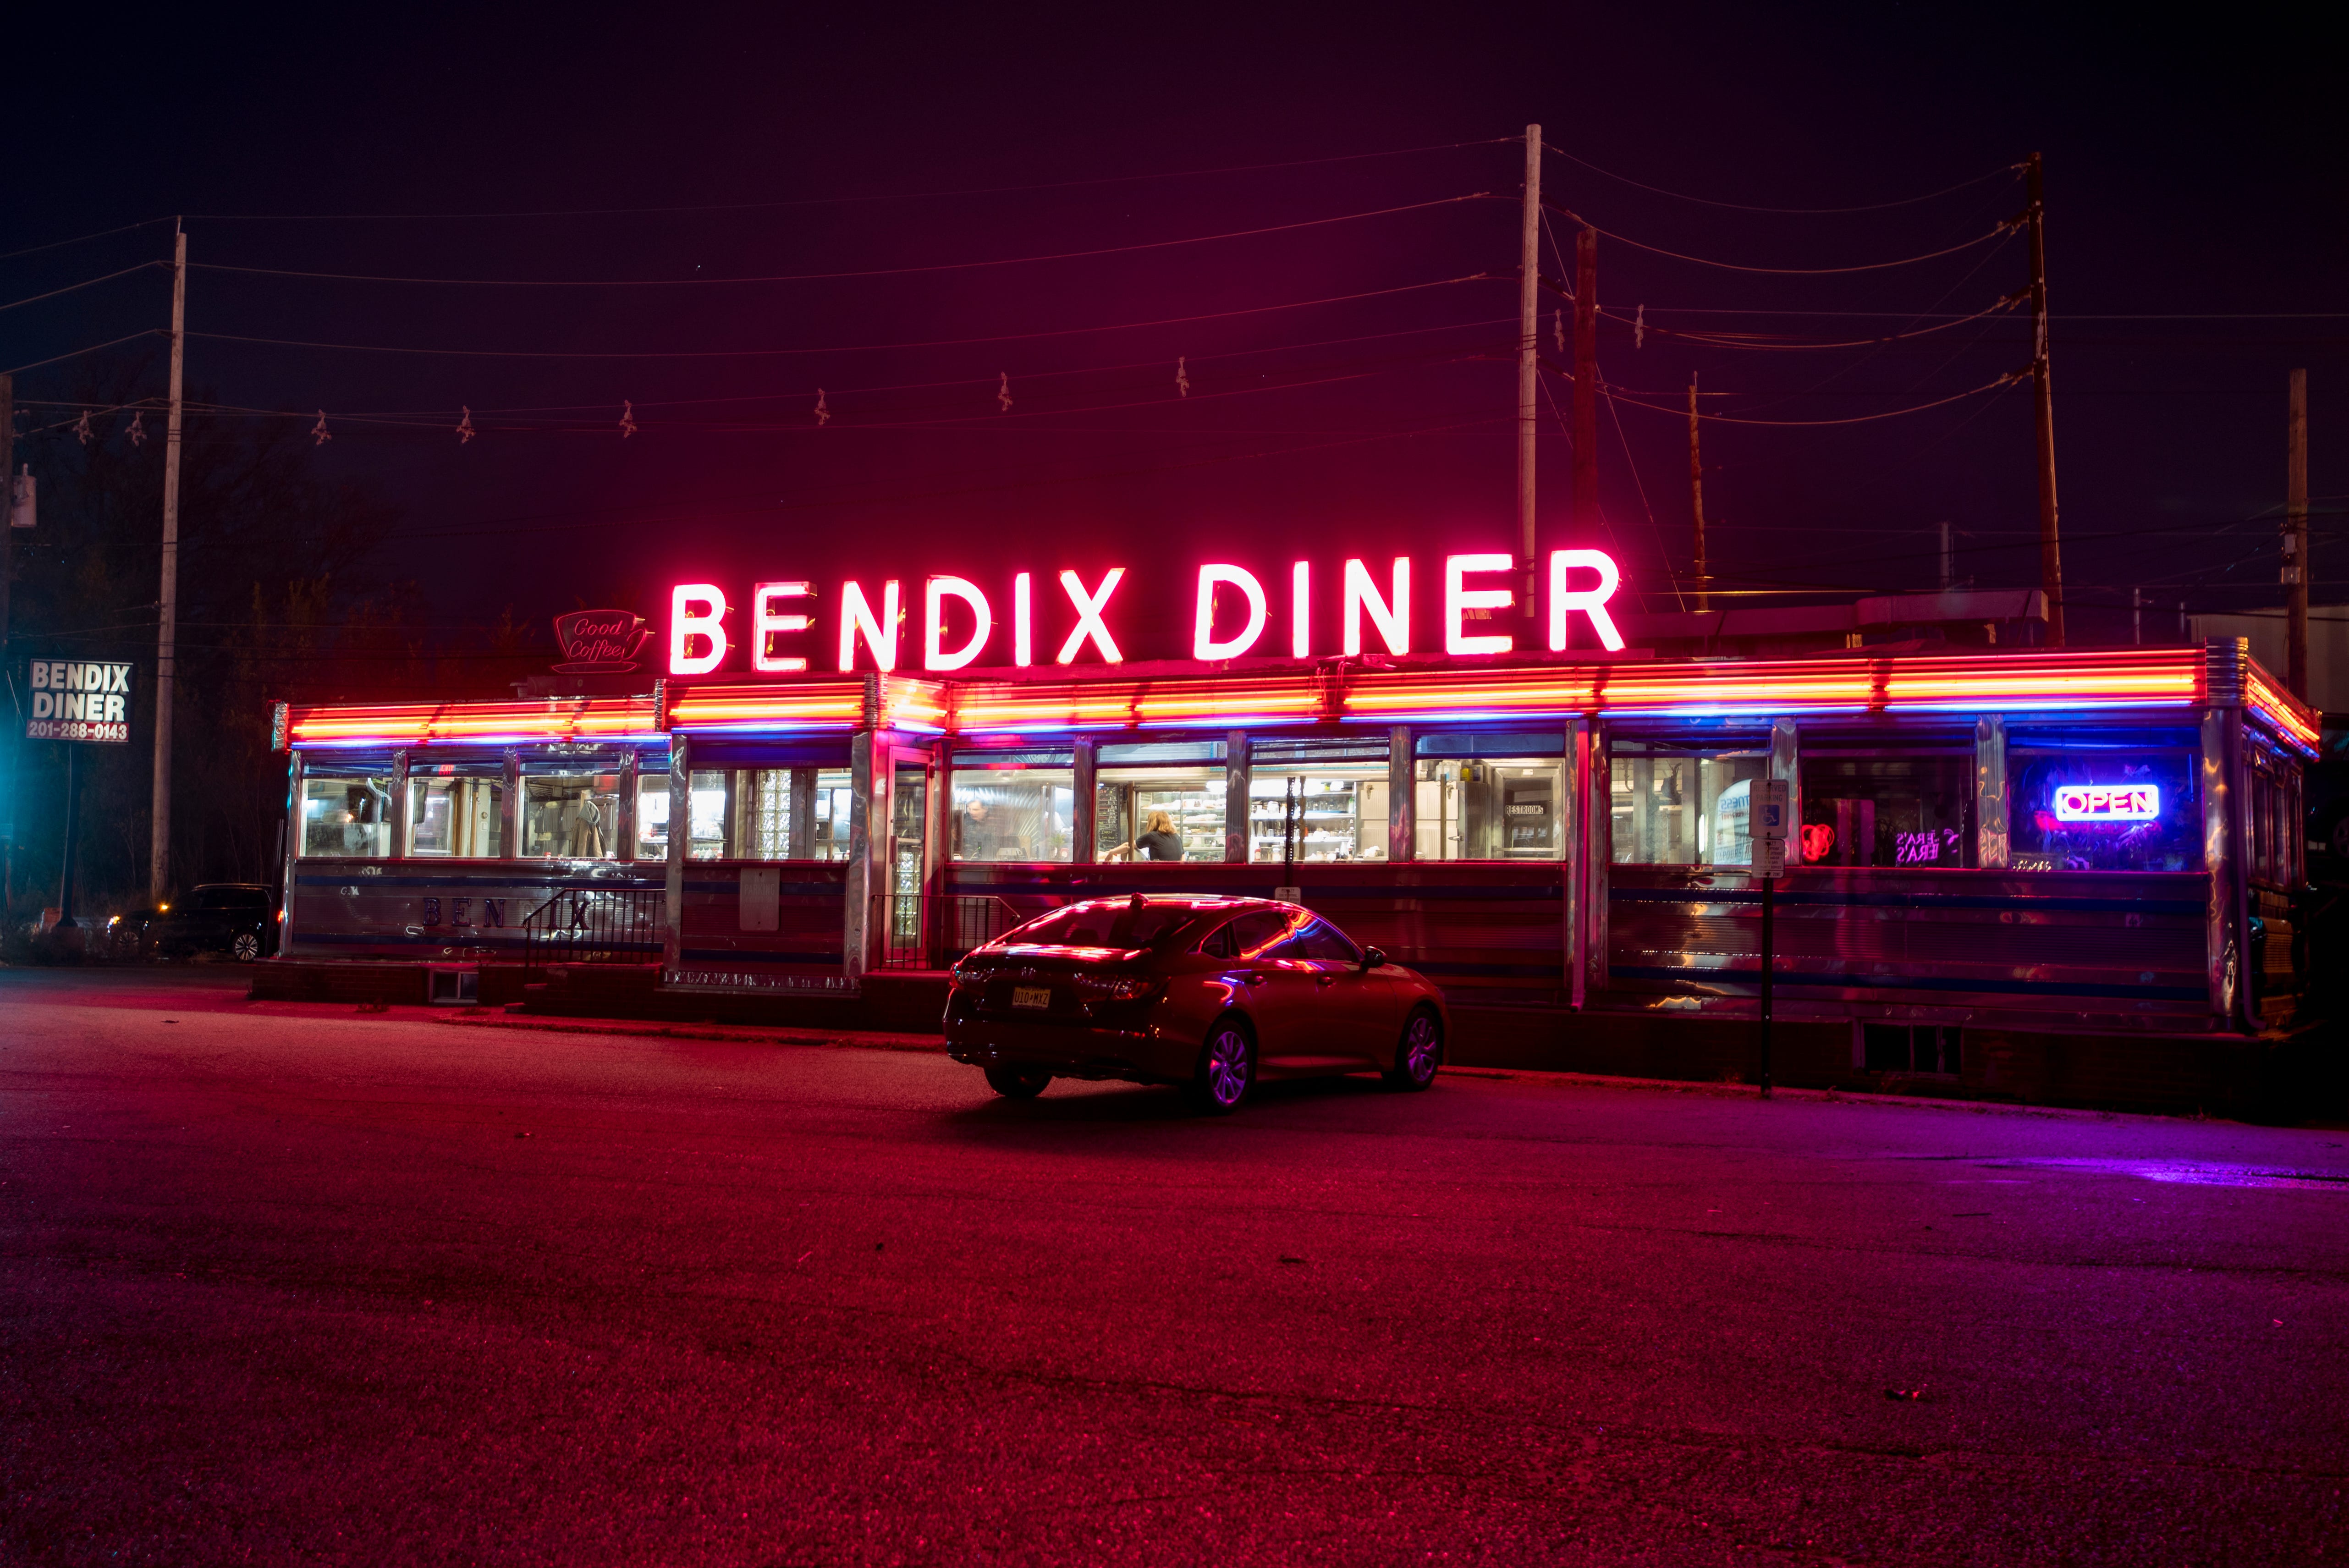 The exterior of Bendix Diner on Friday December 3, 2021.